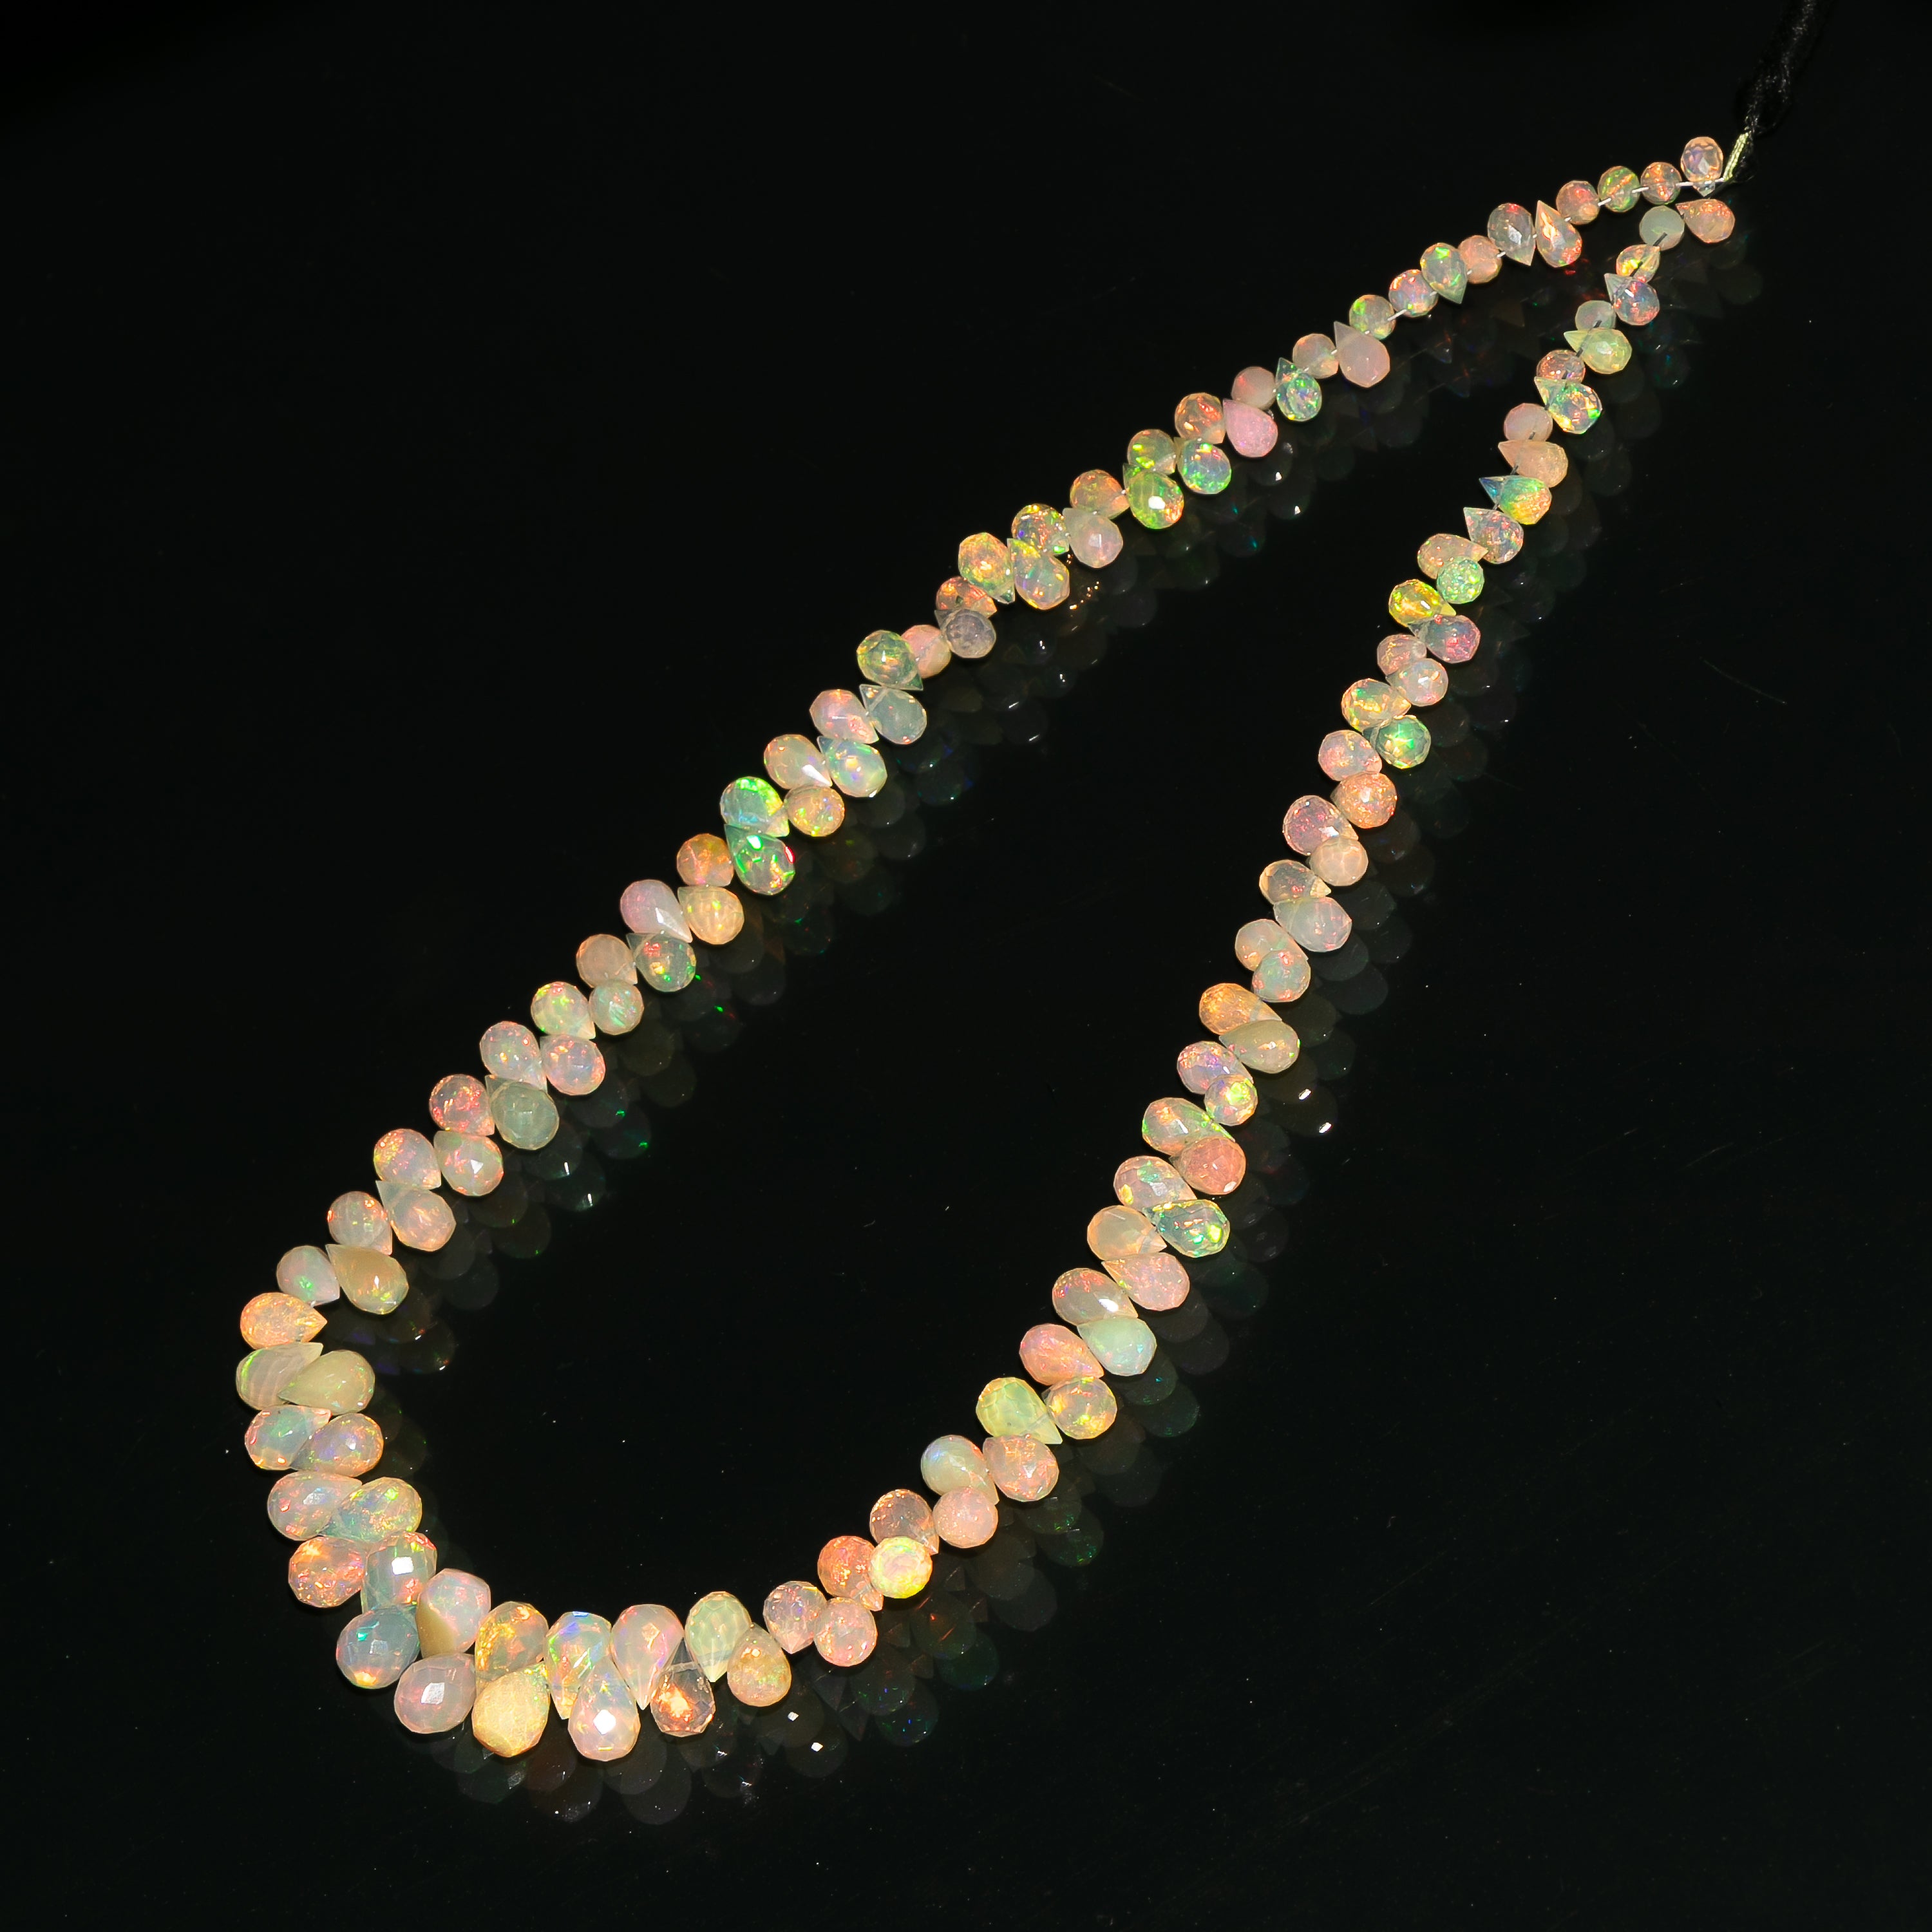 Ethiopian Opal Faceted Beads, 3.5X5.5-6X10mm Ethiopian Opal Drops Beads, Tear Drops Briolettes, Ethiopian Opal Beads, Fire Opal Beads